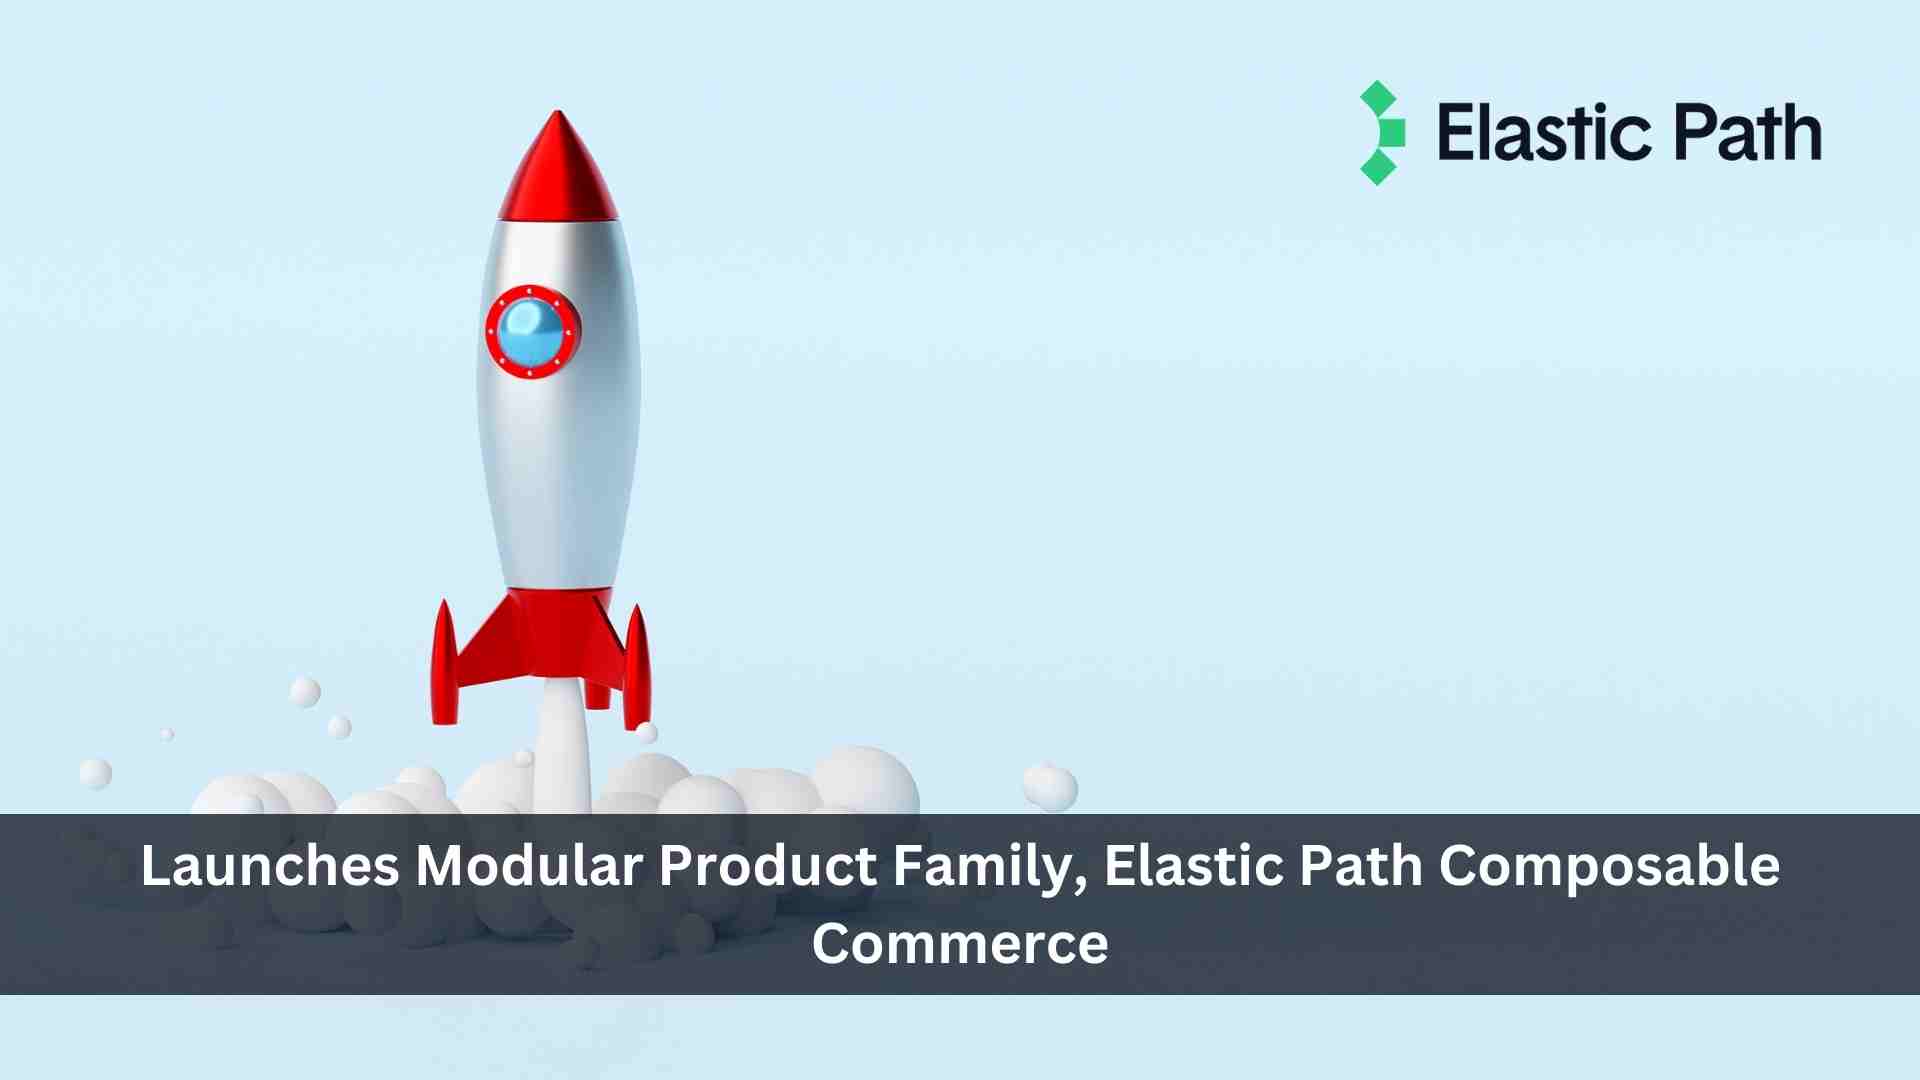 Elastic Path Launches Modular Product Family, Elastic Path Composable Commerce